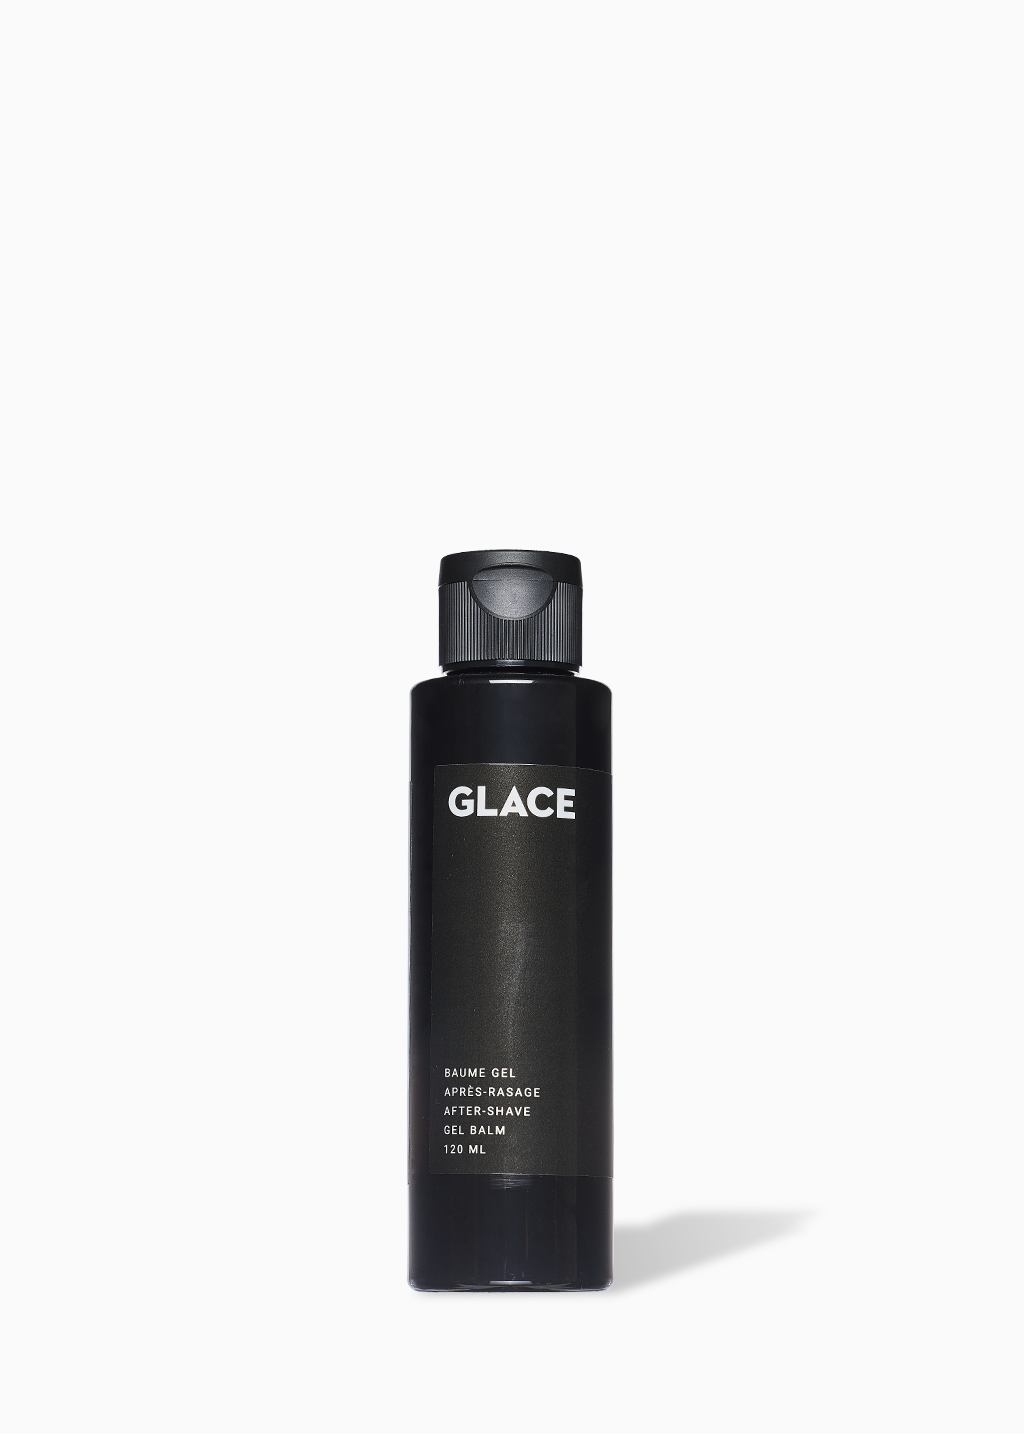 After-shave gel balm - GLACE